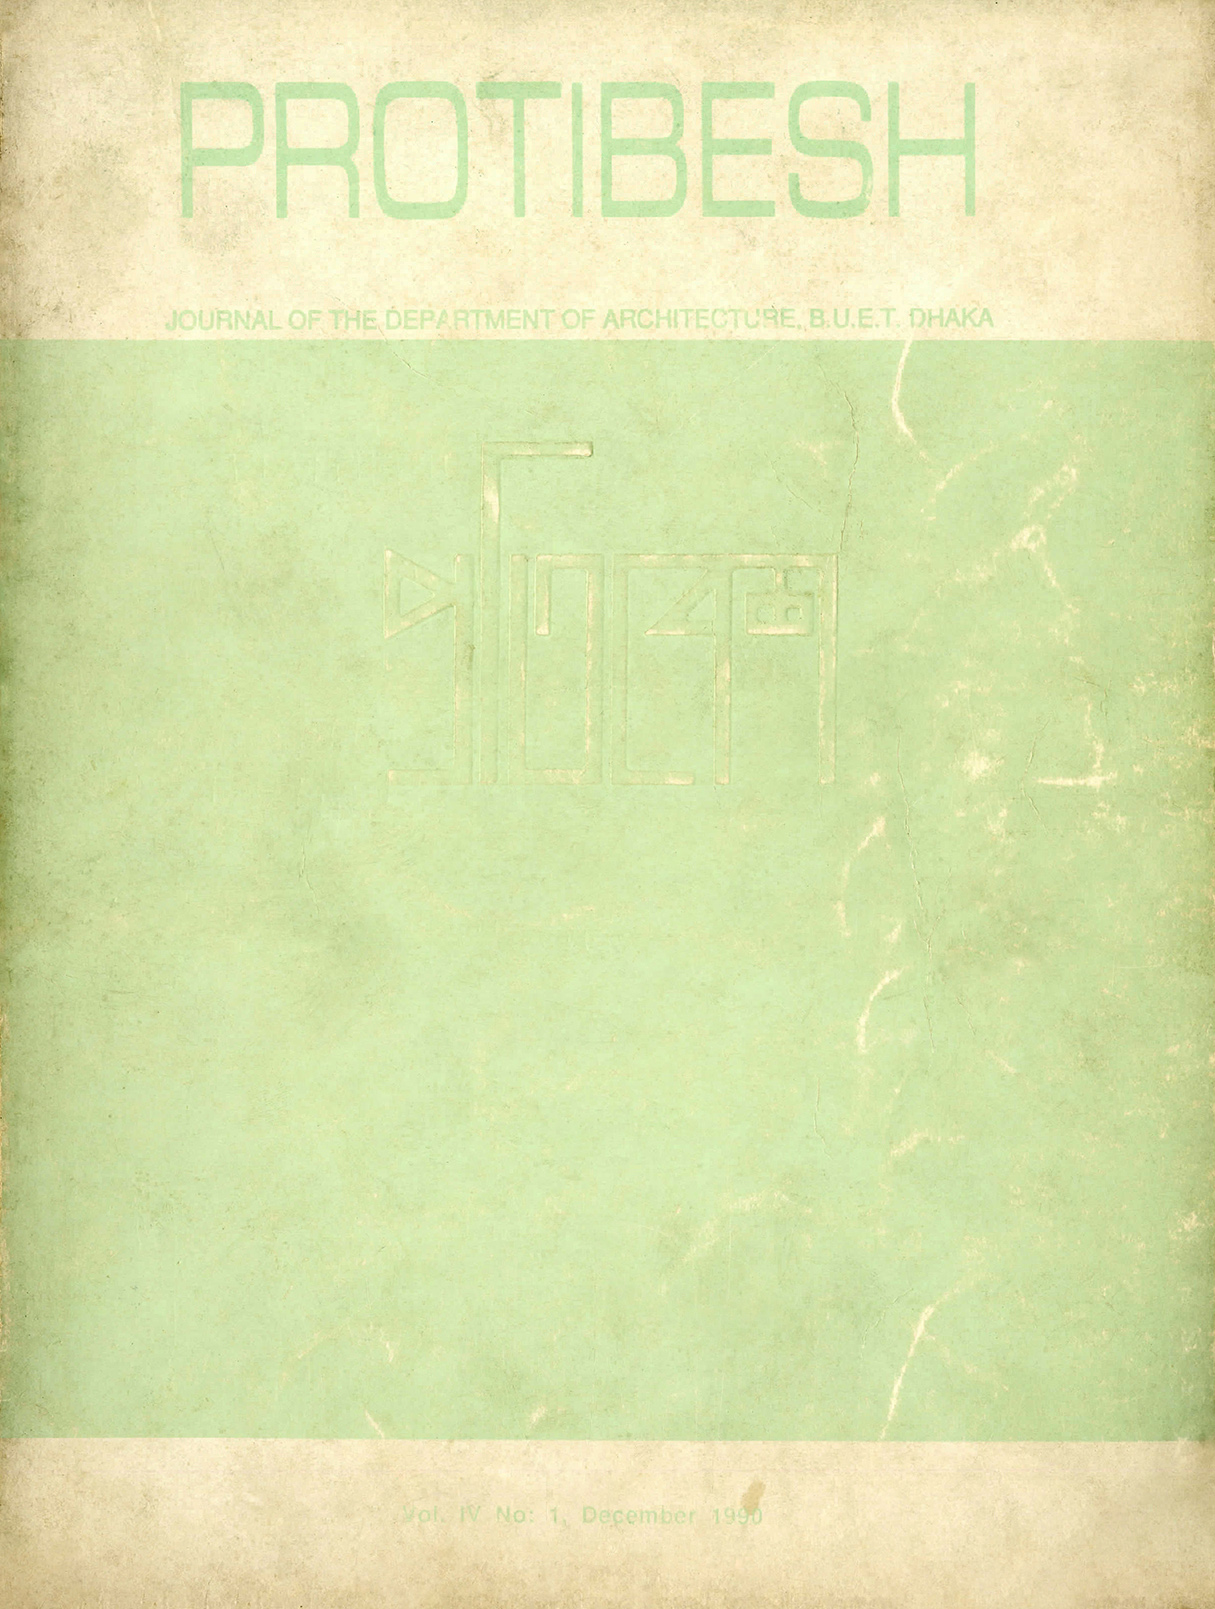 Cover image of Protibesh Vol-04 No-01 December-1990 - Journal of the Department of Architecture, BUET